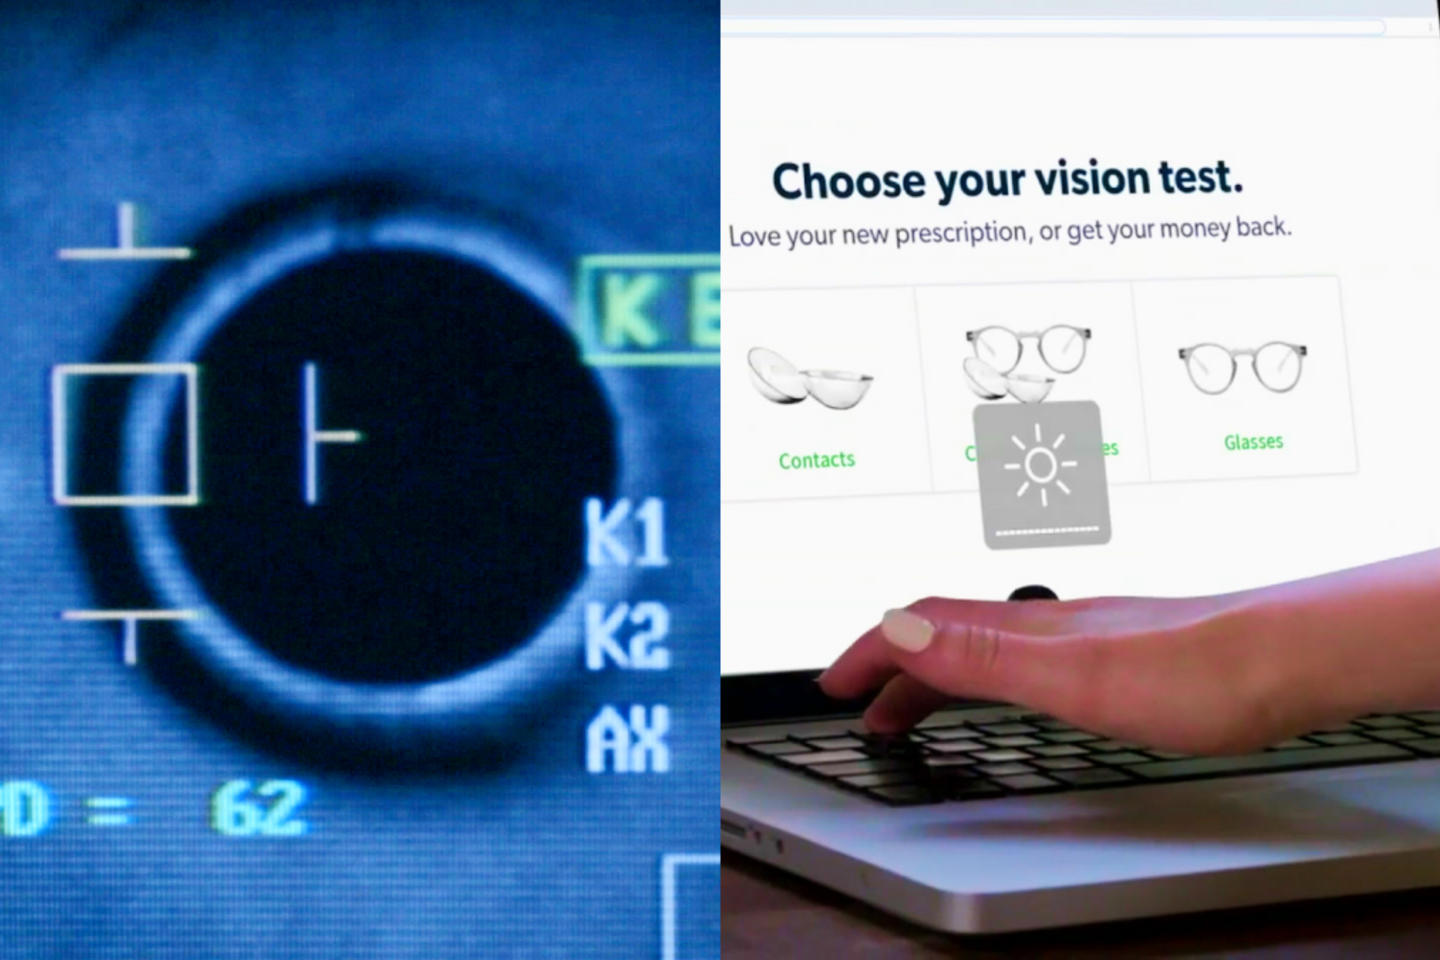 On the left is an image of an eye on a screen and on the right is someone using a keyboard on a laptop that says "Choose your vision test"